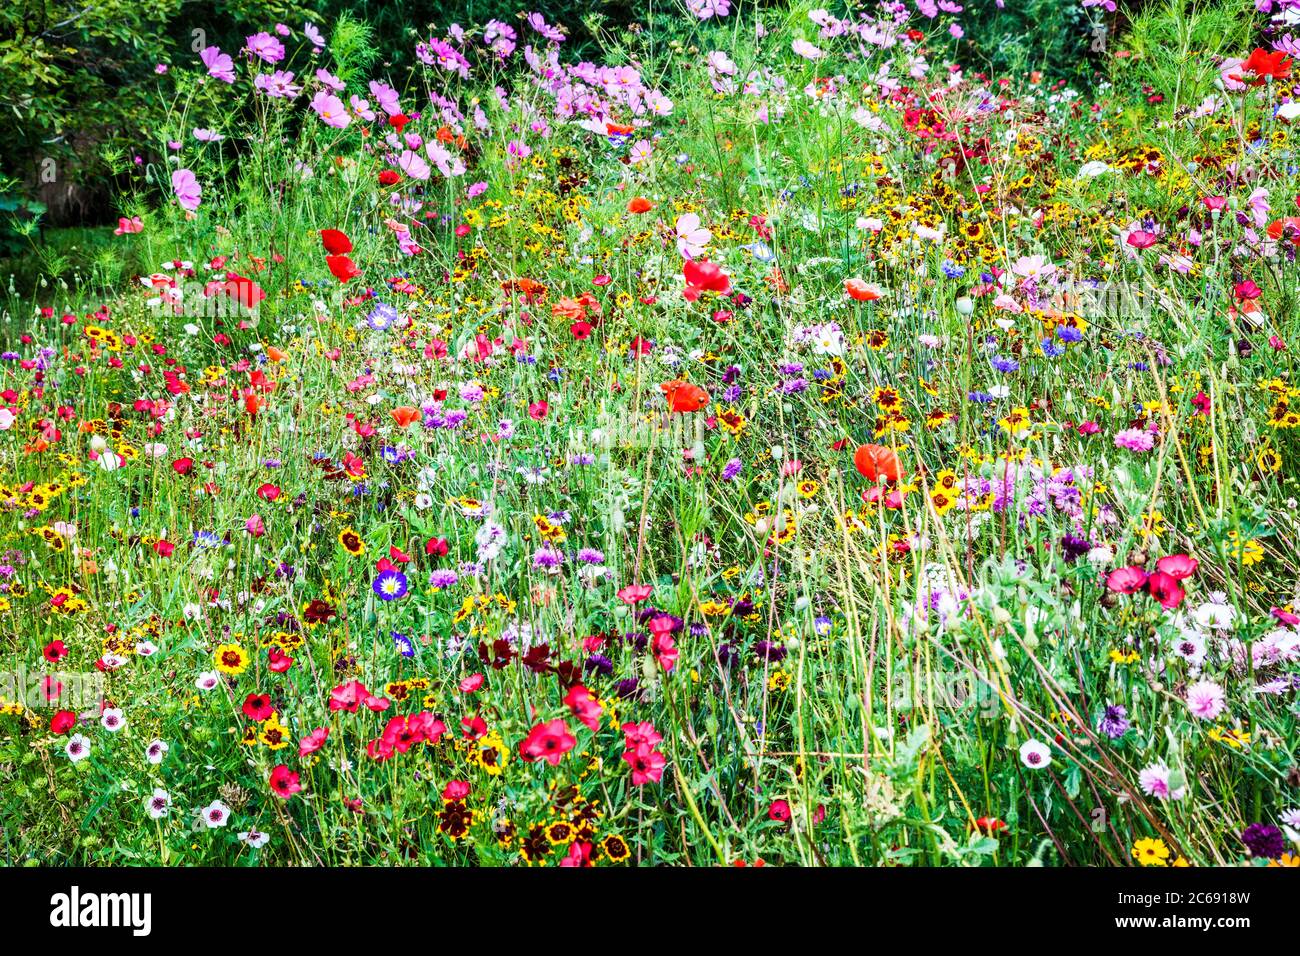 A wildflower meadow area in an English country garden. Stock Photo